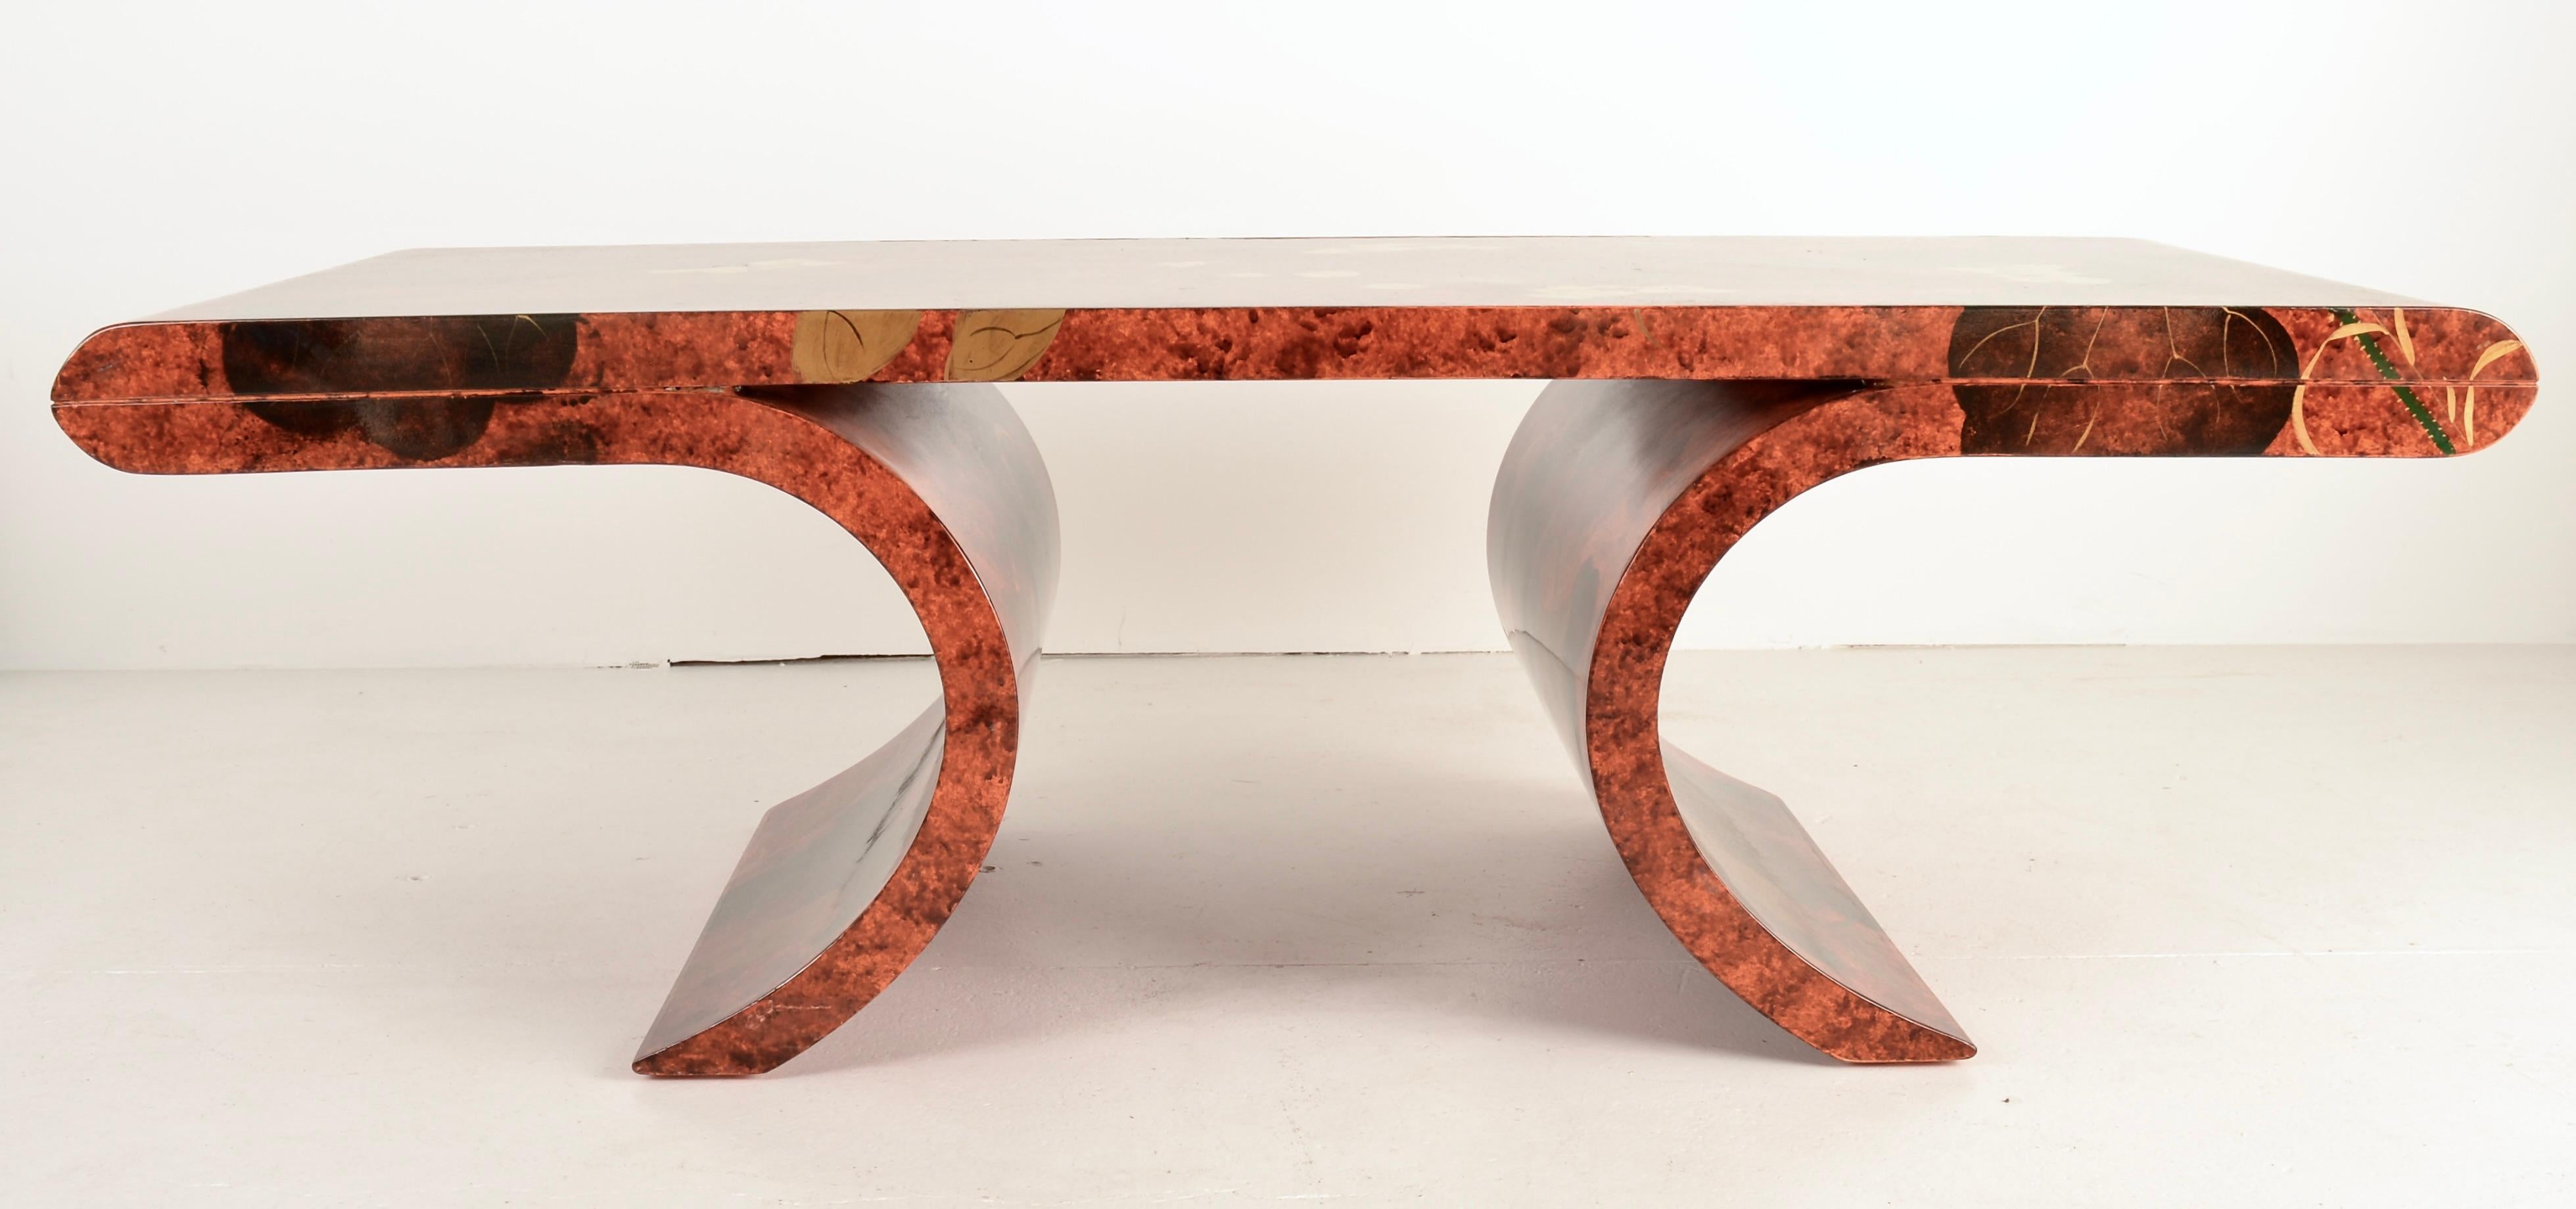 Beautifully hand painted decoration on an oil-spot background makes this table a real stand out. An attractive sculptural form adds to its appeal. The table has bee refreshed with a new lacquer top coat in high gloss. Very Fien condition. 